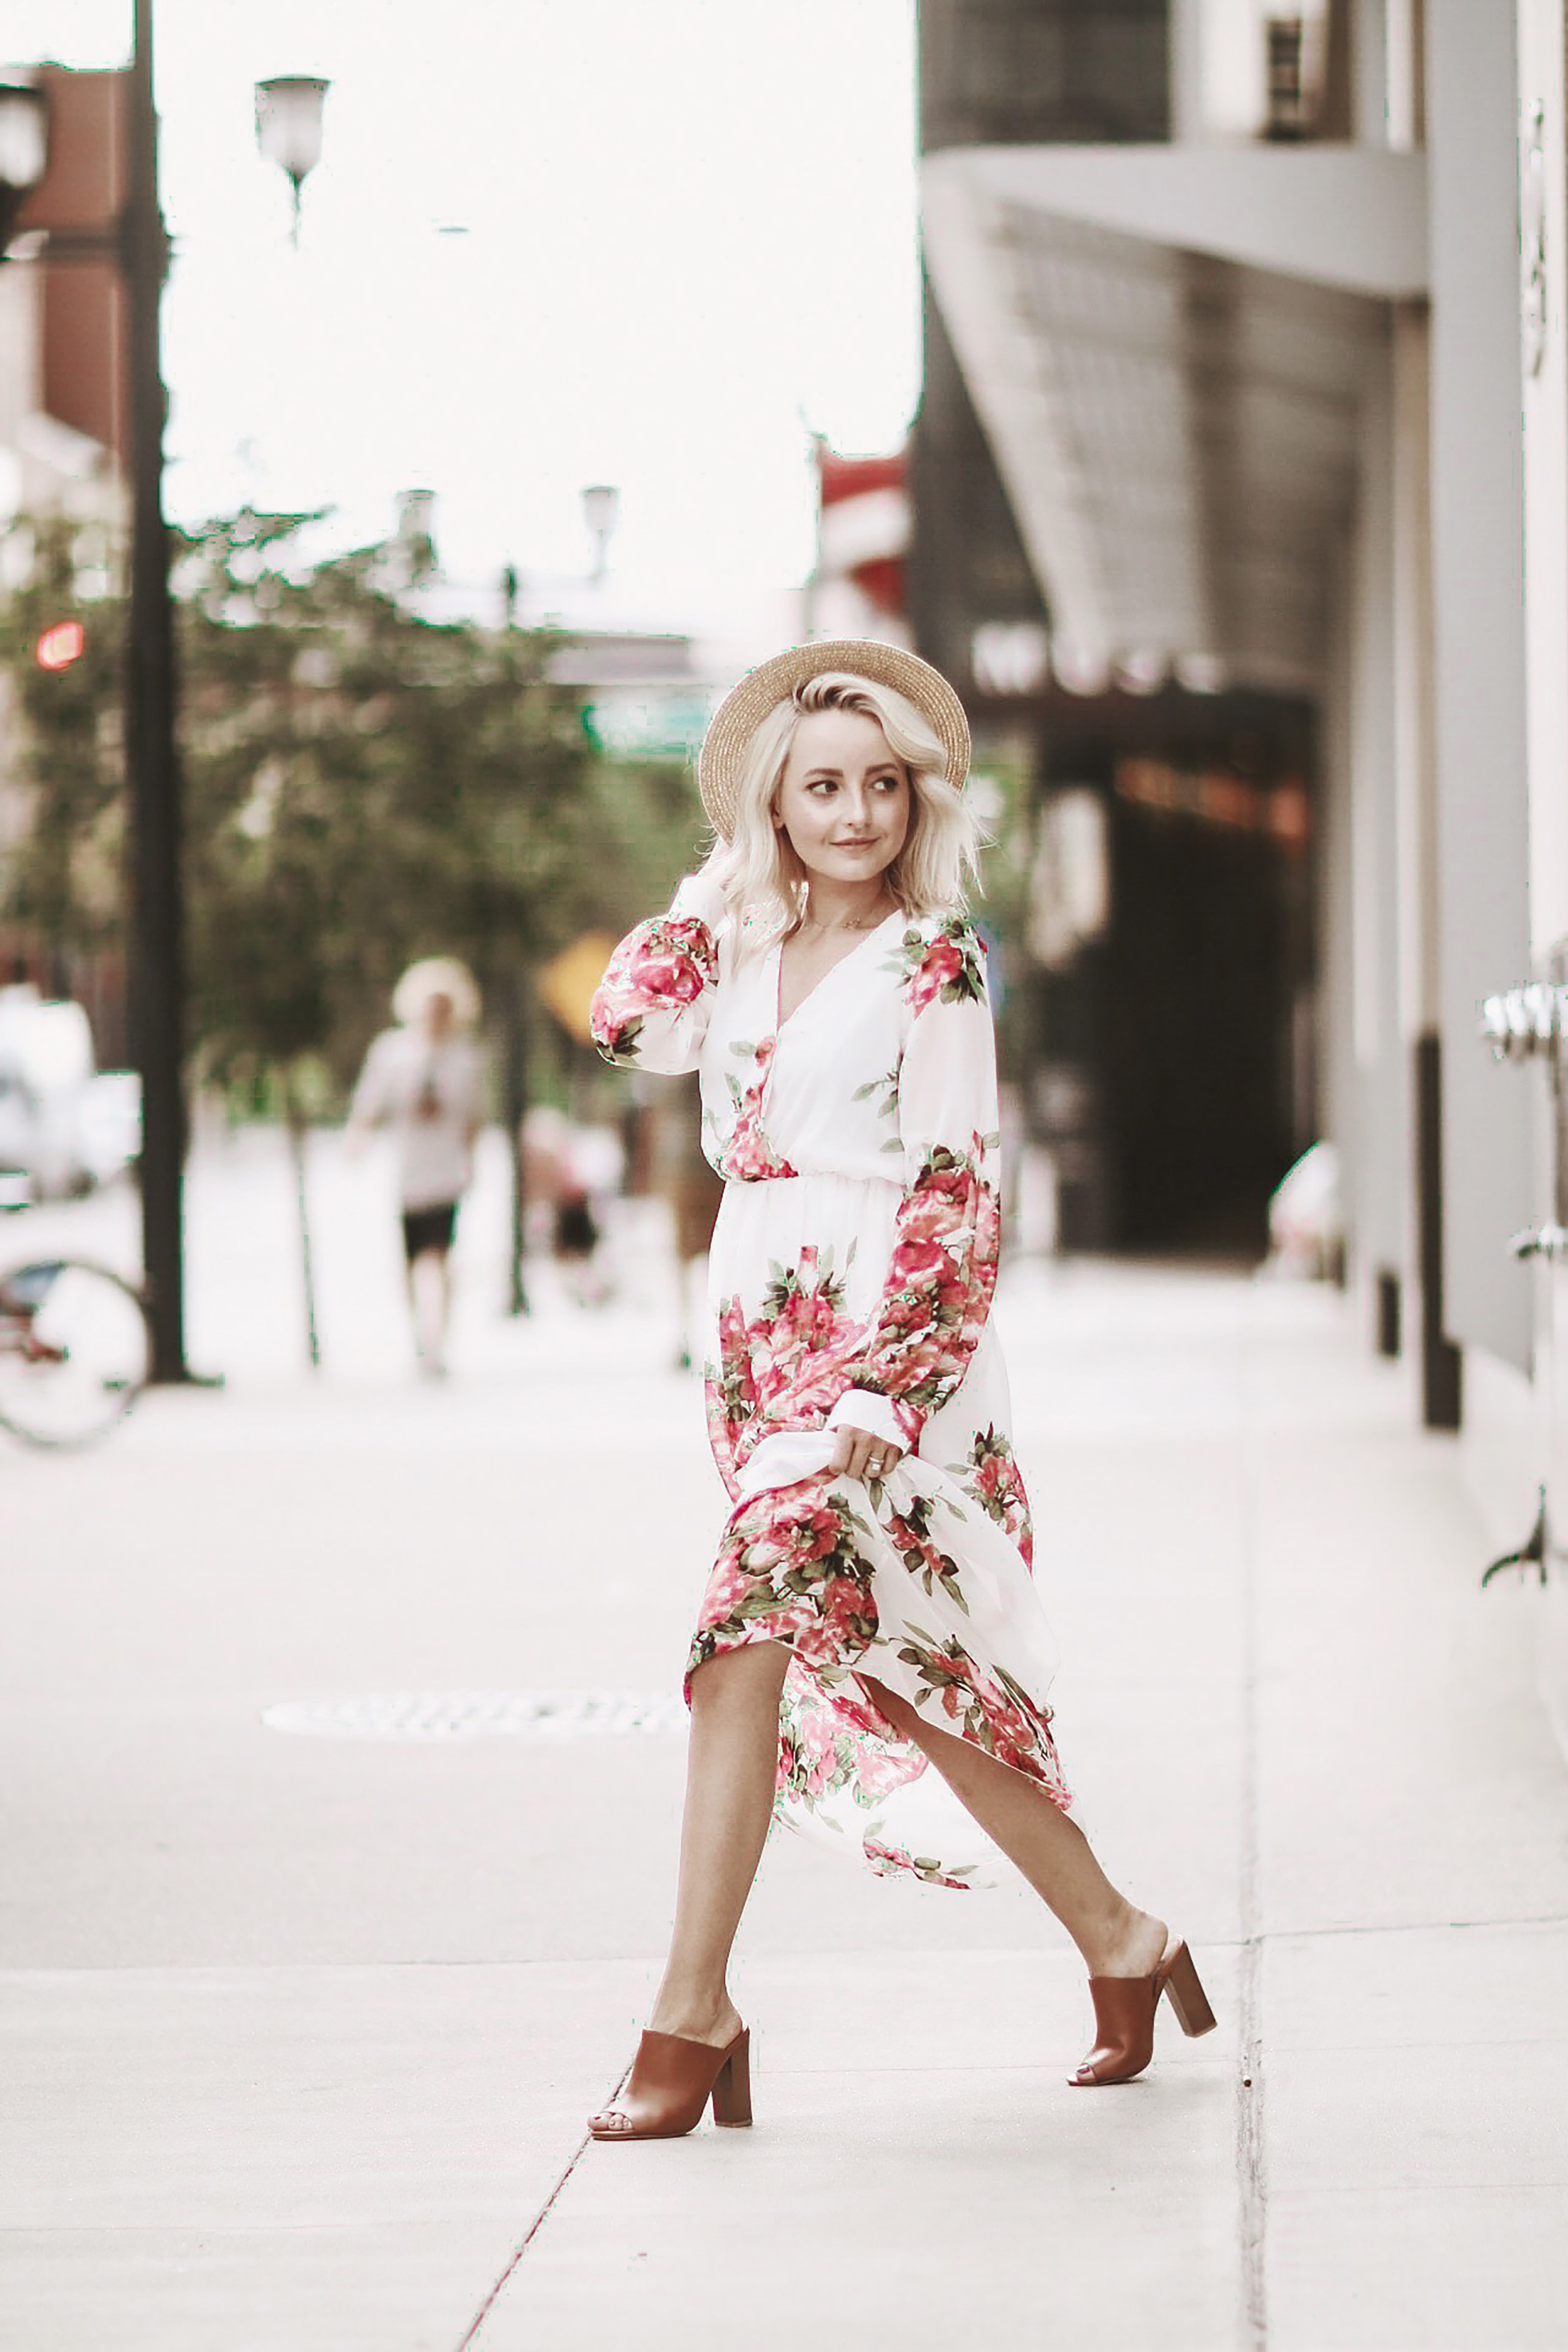 Alena Gidenko of modaprints.com styles a floral maxi dress for Fall with brown open toe mules